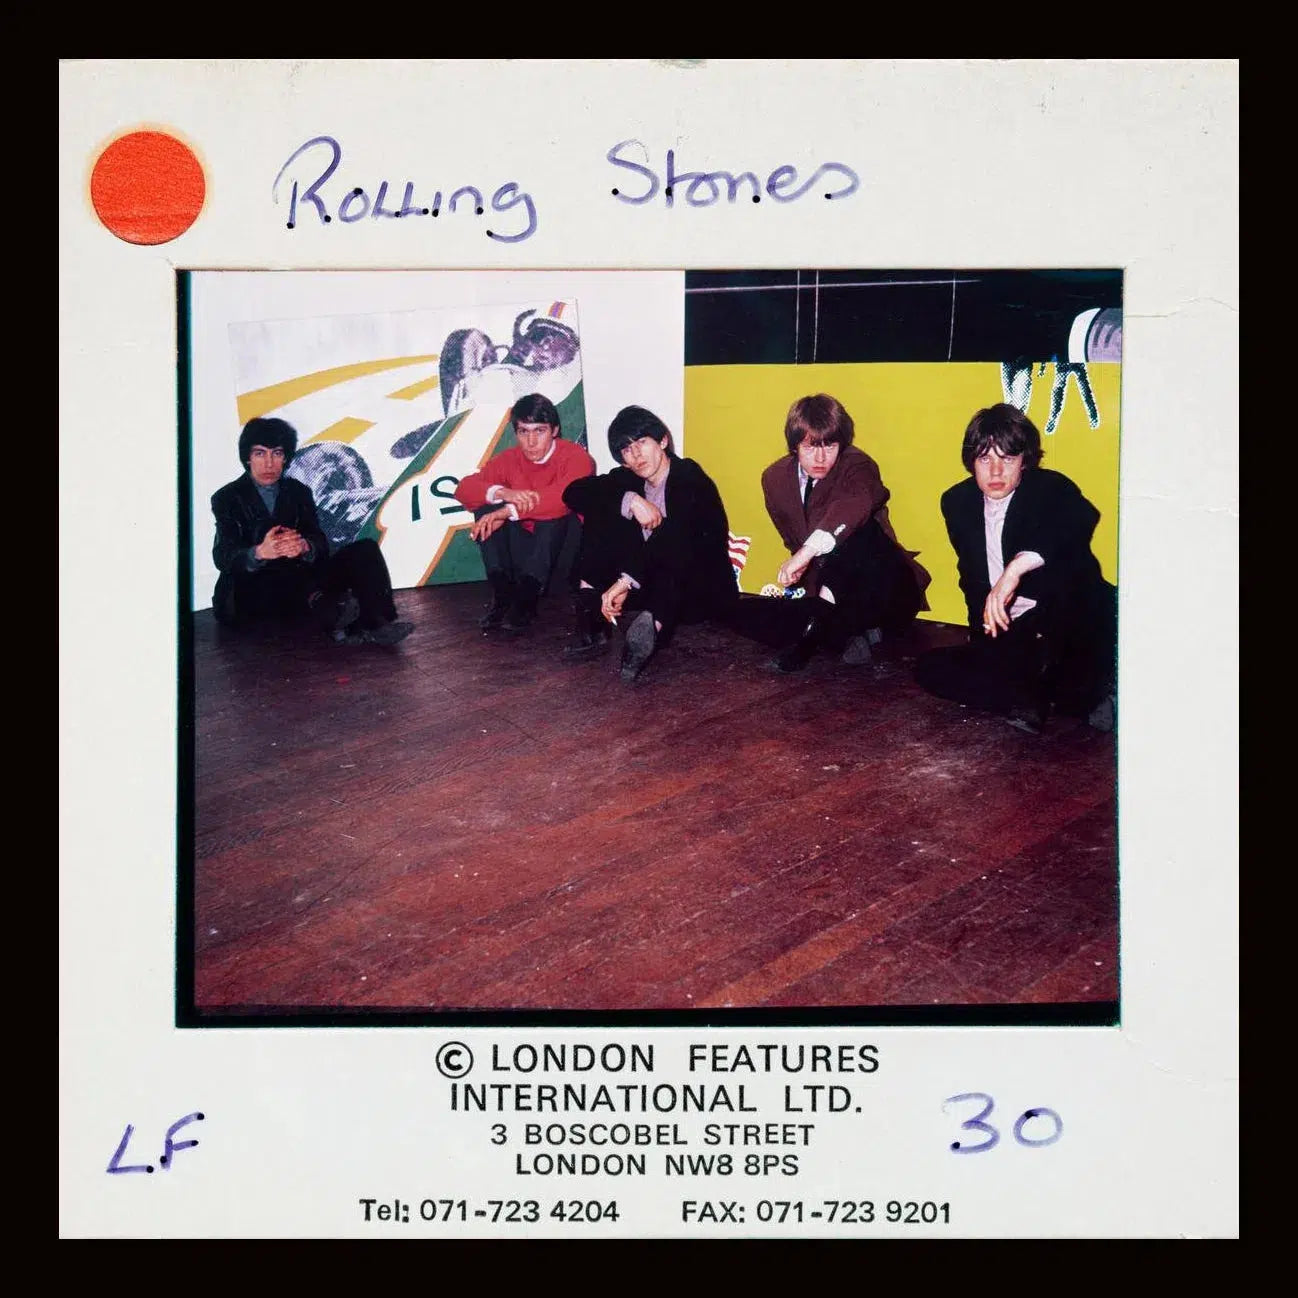 The Rolling Stones - Slide 5, from The Wild Ones collection-PurePhoto